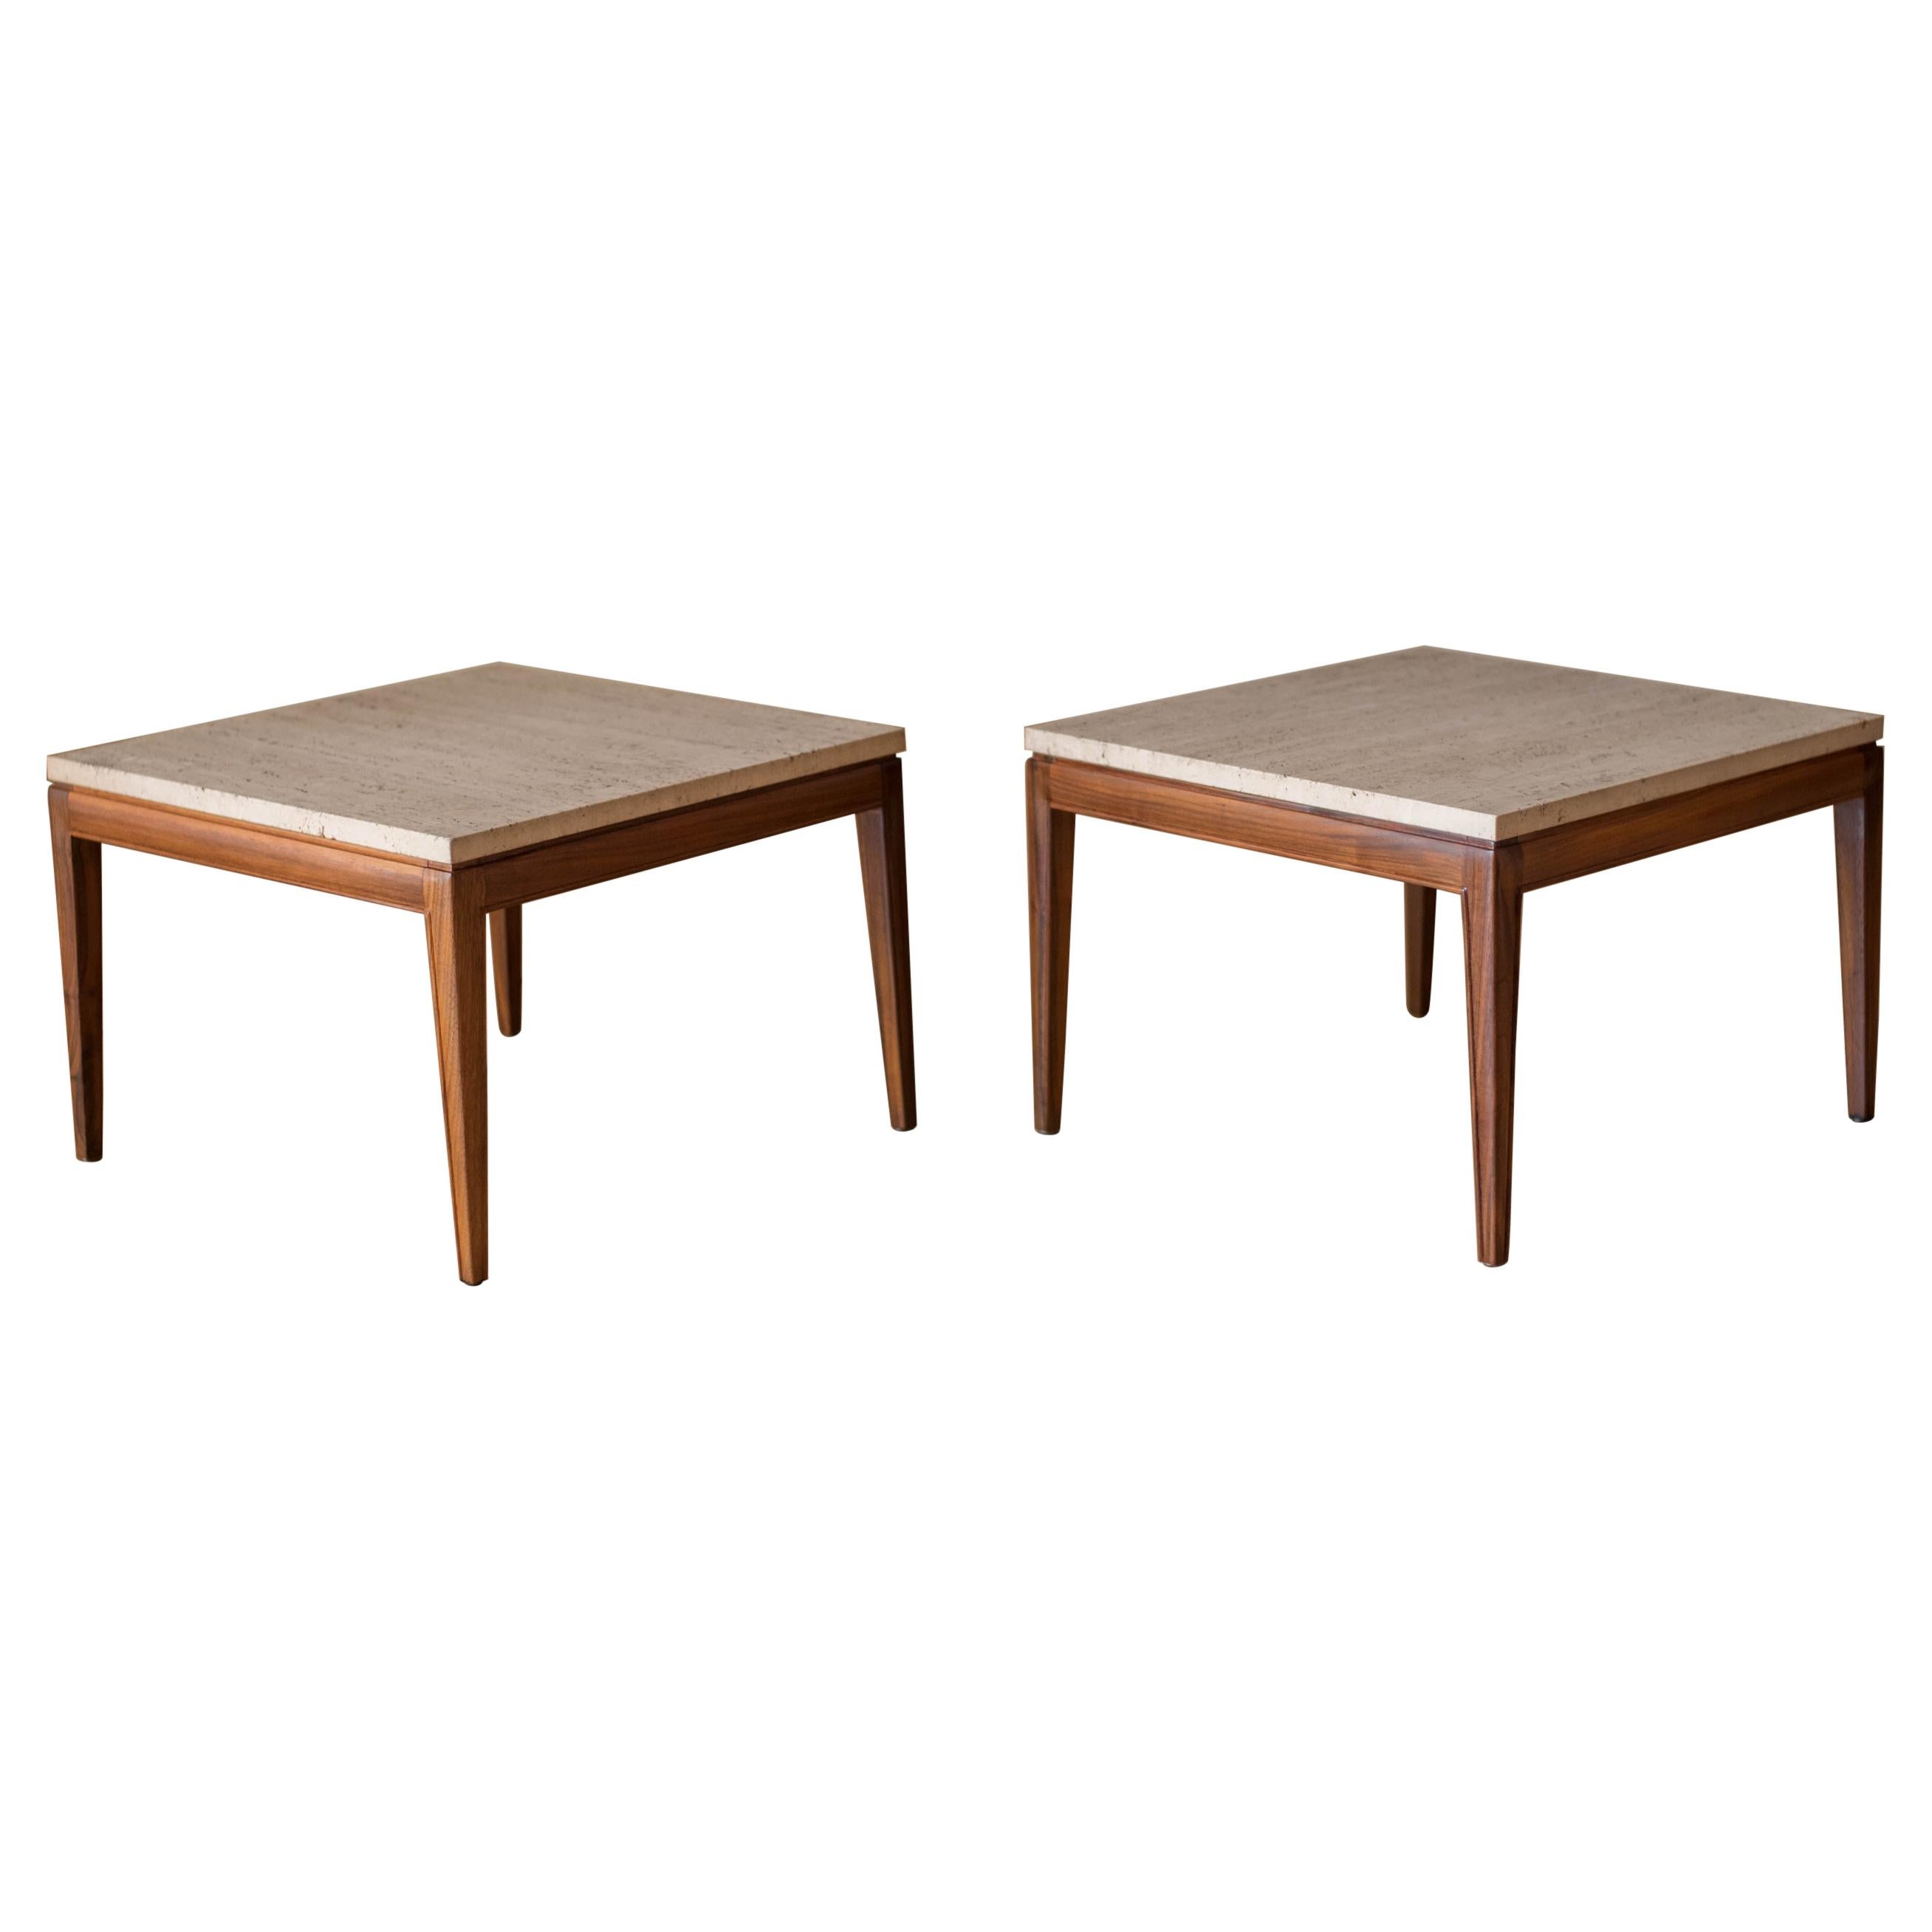 Pair of Vintage Travertine and Walnut End Tables